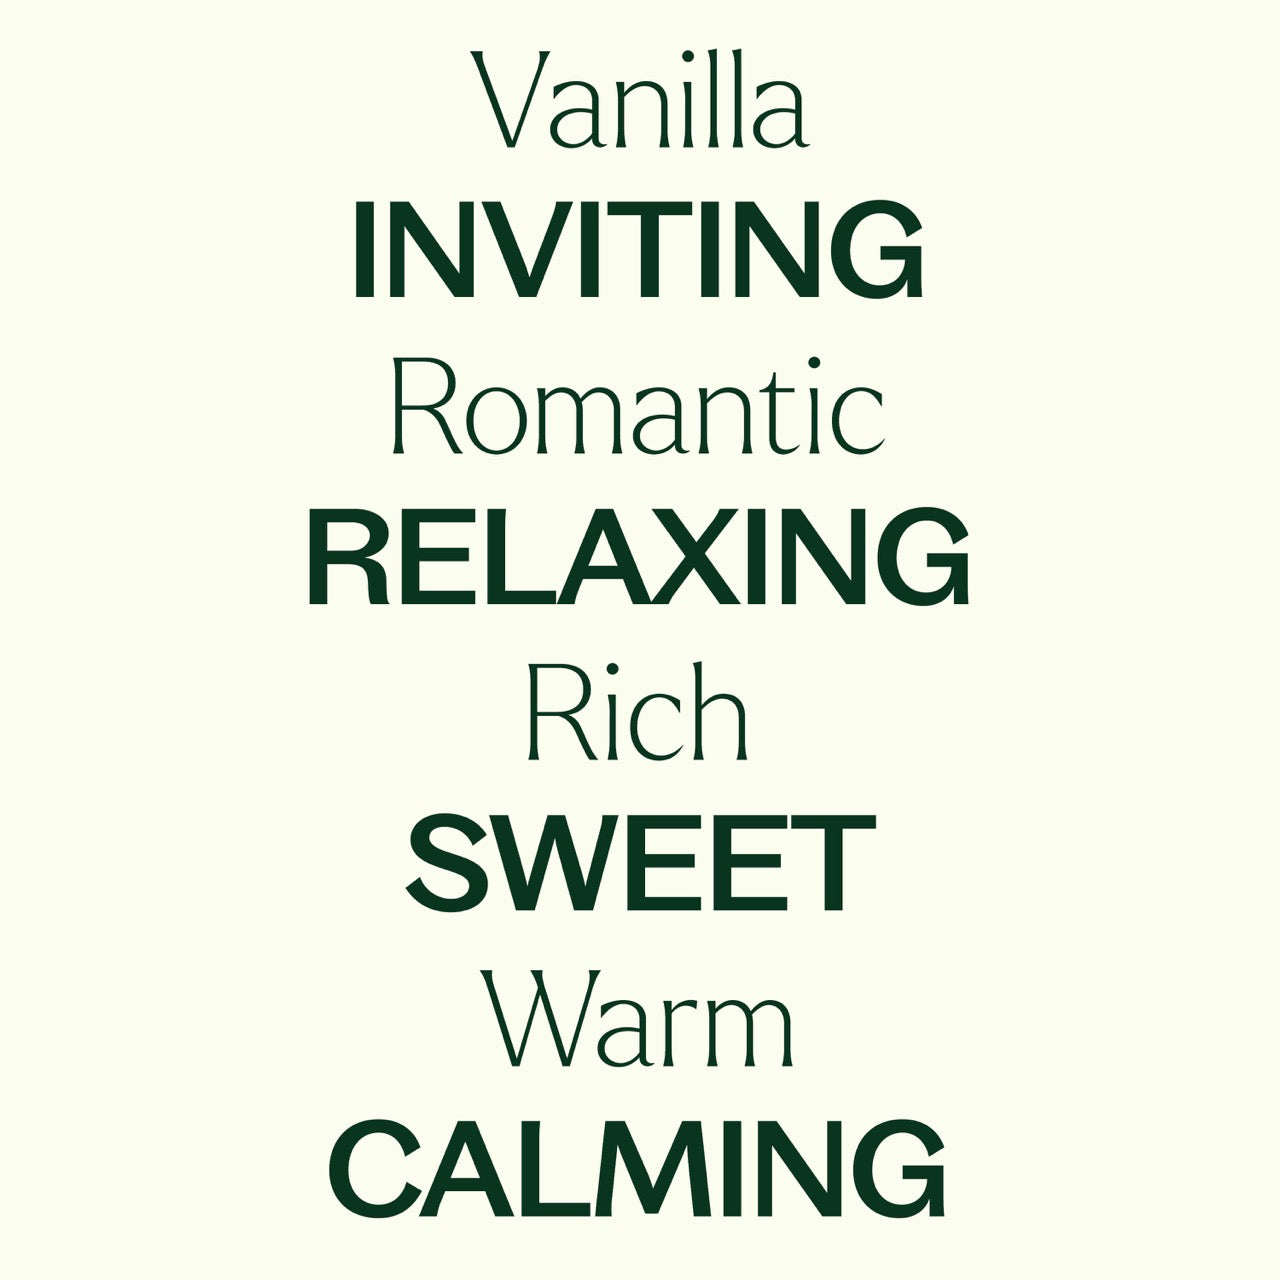 Vanilla Botanical Extract key features: inviting, romantic, relaxing, rich, sweet, warm, calming